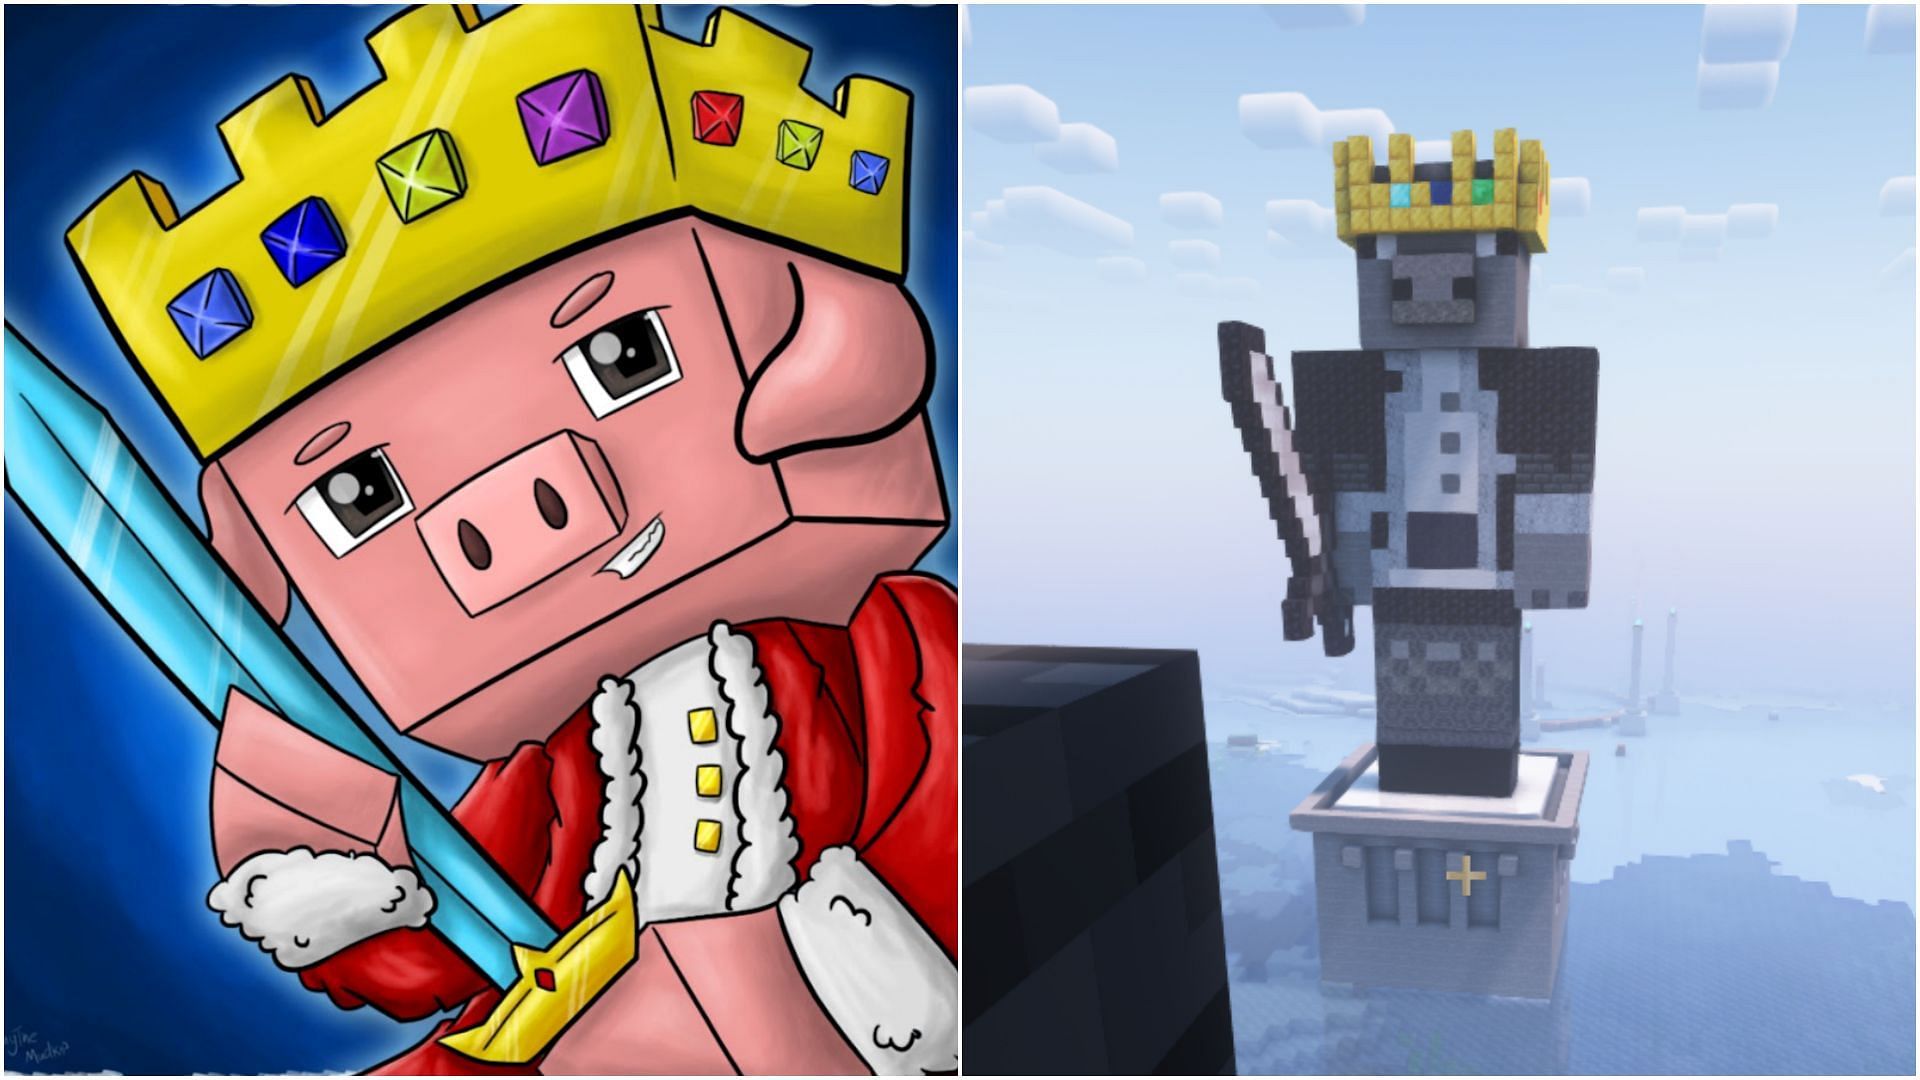 Minecraft Redditor creates a giant statue of late Technoblade in the game (Image via Sportskeeda)